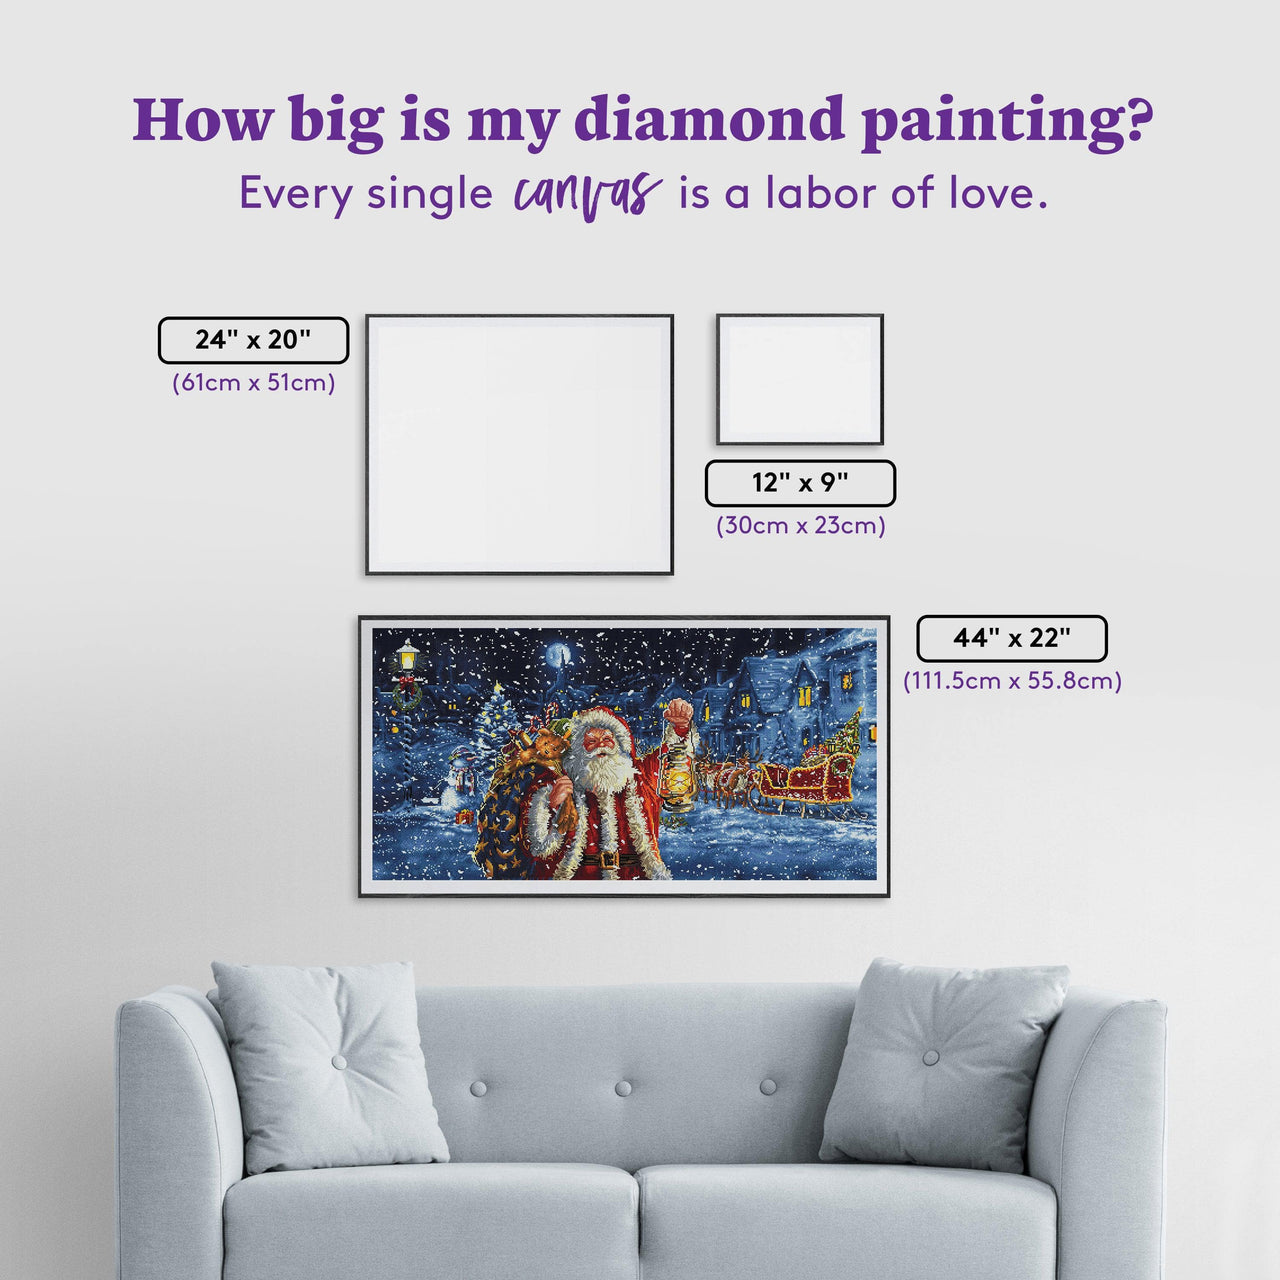 Diamond Painting Lighting the Way 44" x 22" (111.5cm x 55.8cm) / Square with 60 Colors including 3 ABs / 100,352